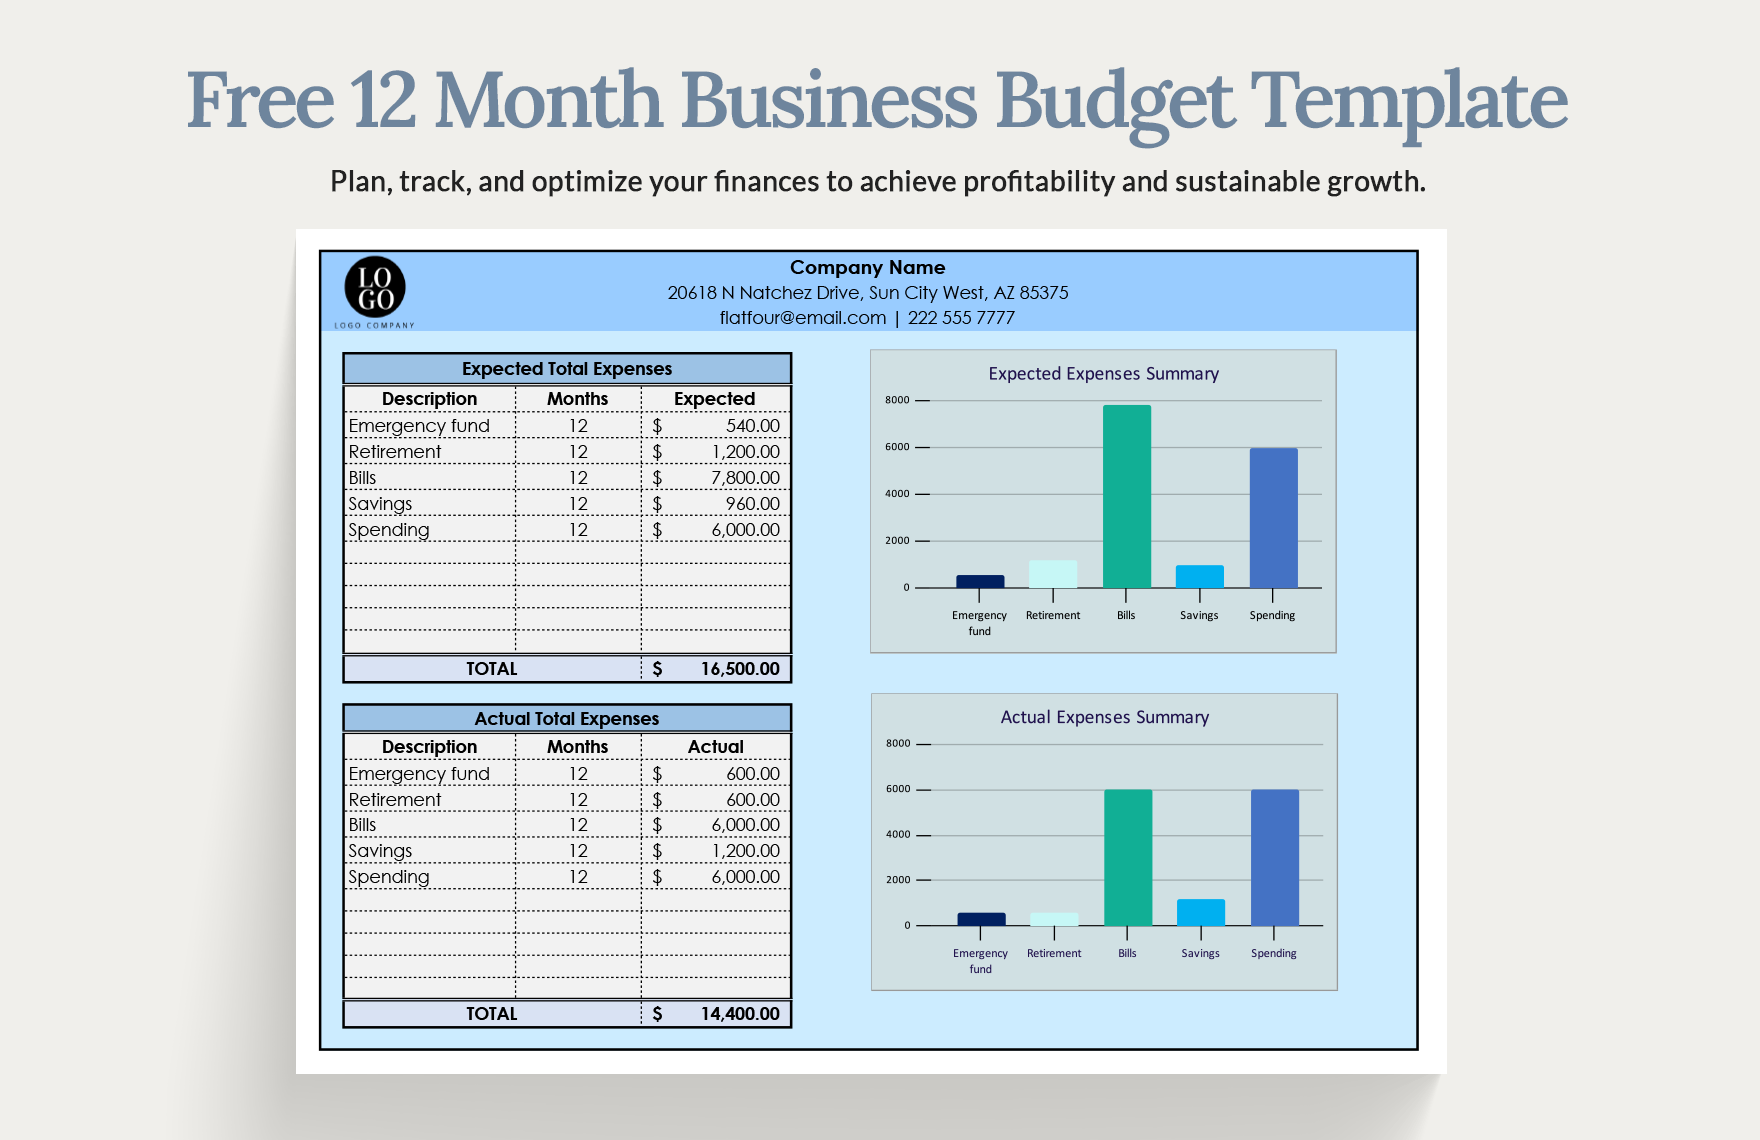 Free 12 Month Business Budget Template